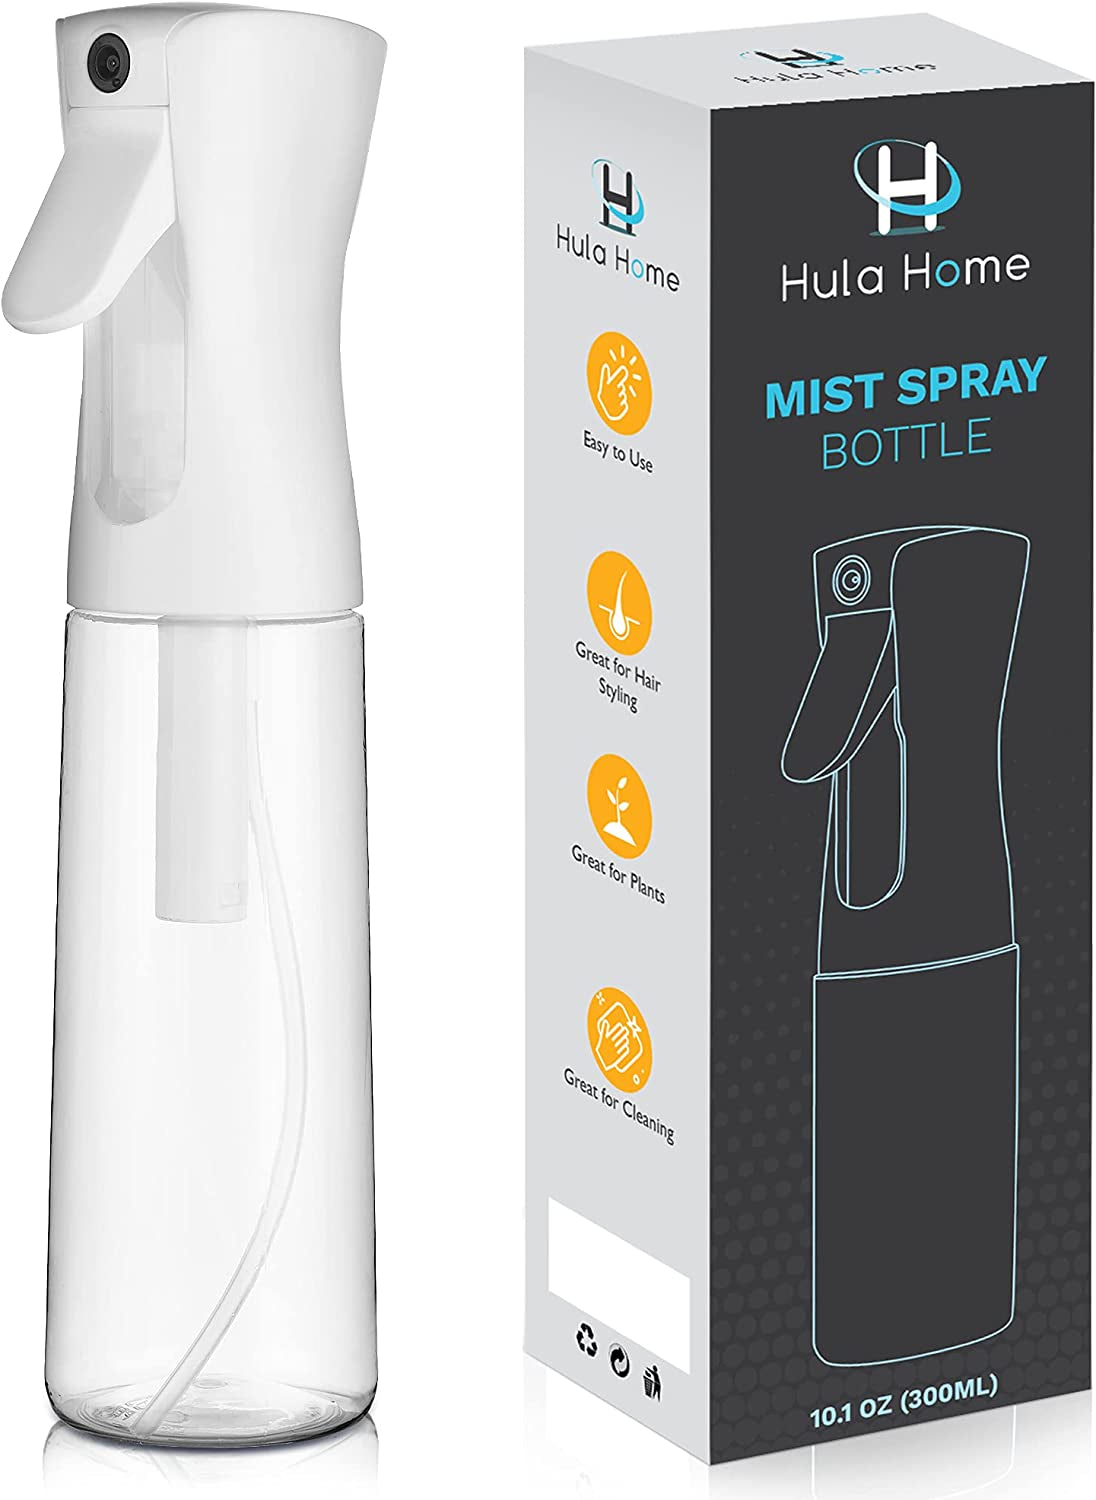 Continuous Spray Bottle for Hair (10.1Oz/300Ml) Mist Empty Ultra Fine Plastic Water Sprayer – for Hairstyling, Cleaning, Salons, Plants, Essential Oil Scents & More - White